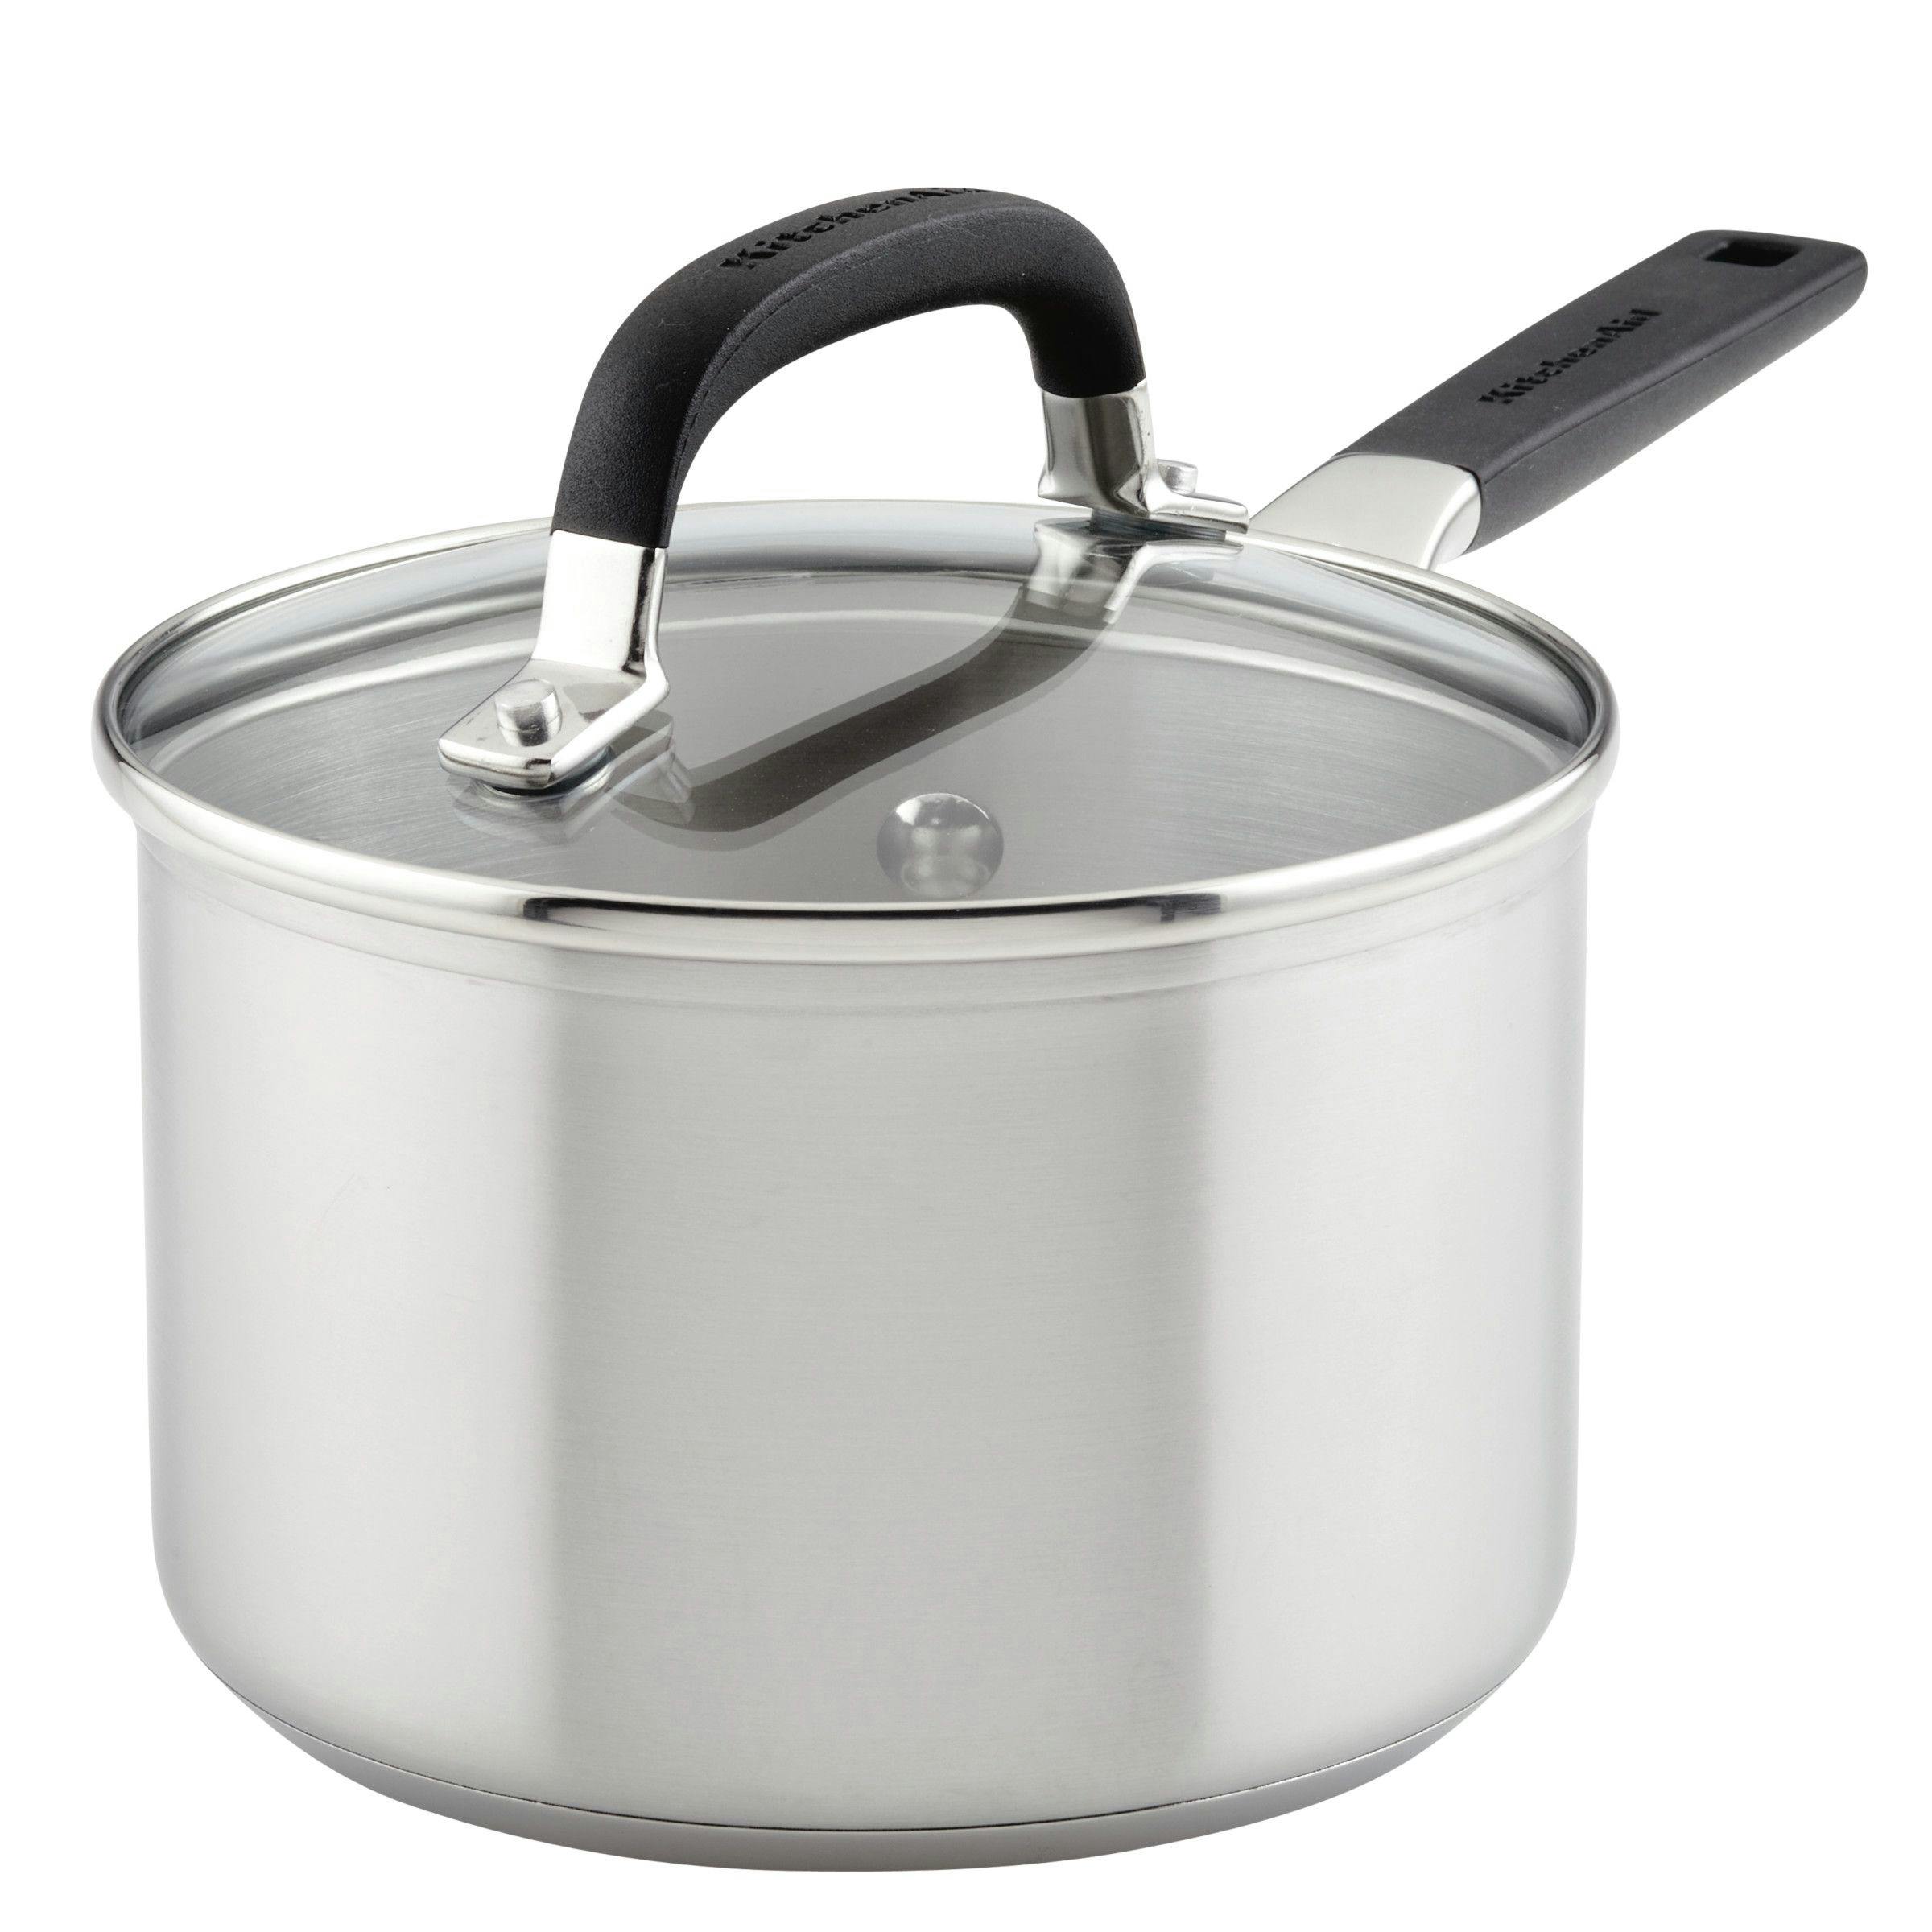 KitchenAid Stainless Steel Induction Saucepan with Measuring Marks and Lid, 2-Quart, Brushed Stainless Steel